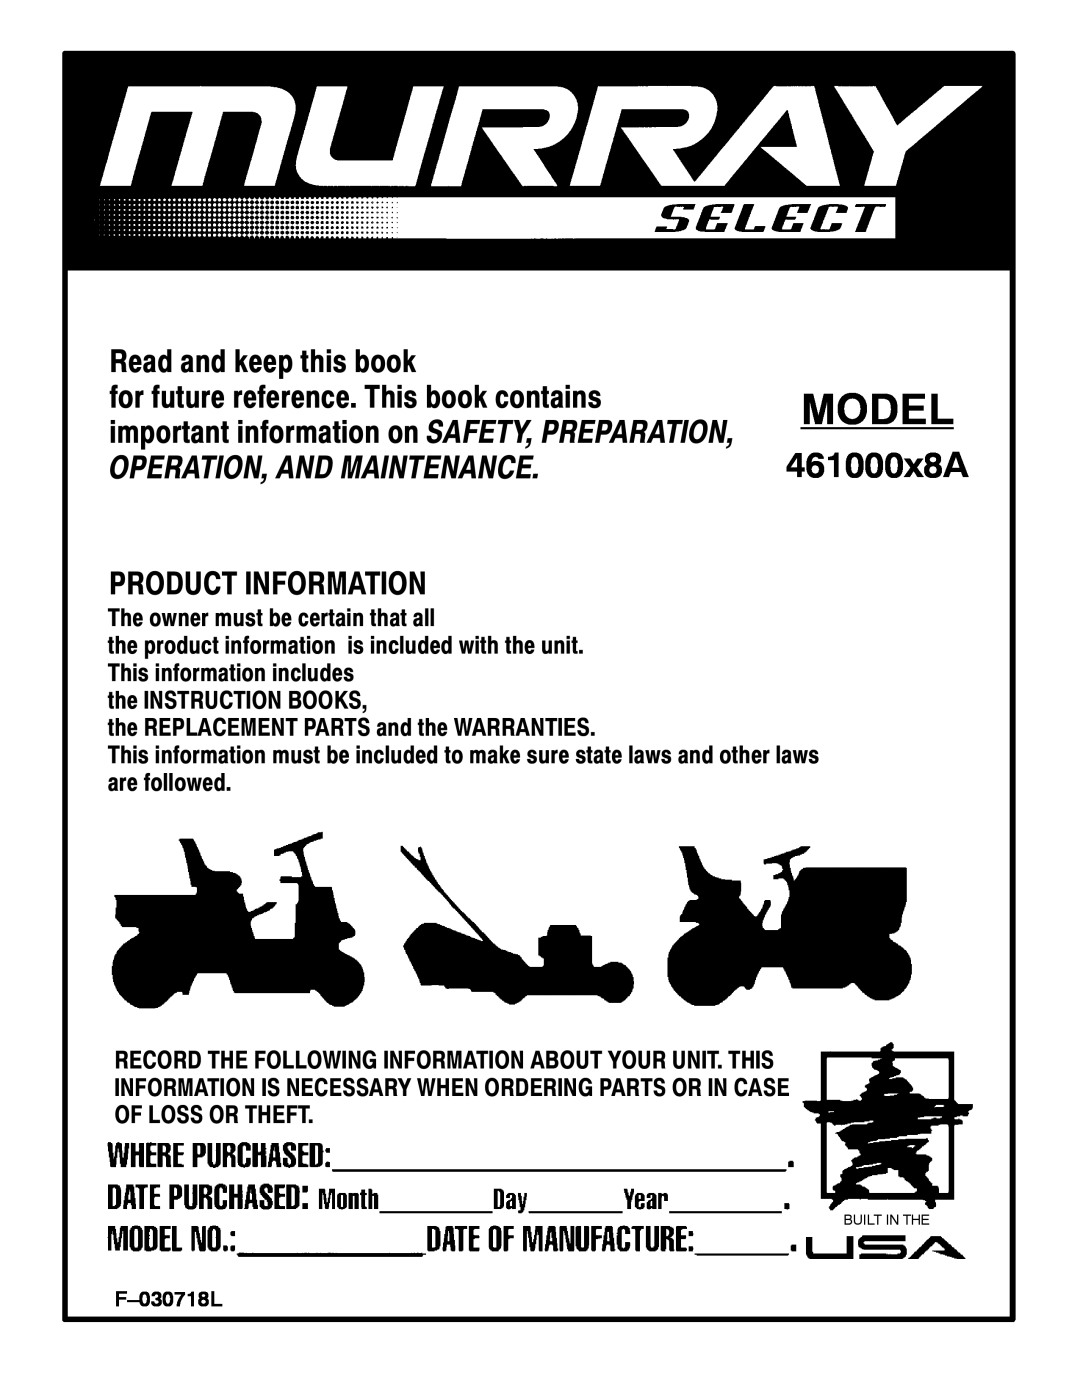 Murray 461000x8A manual Model, Read and keep this book, Product Information 